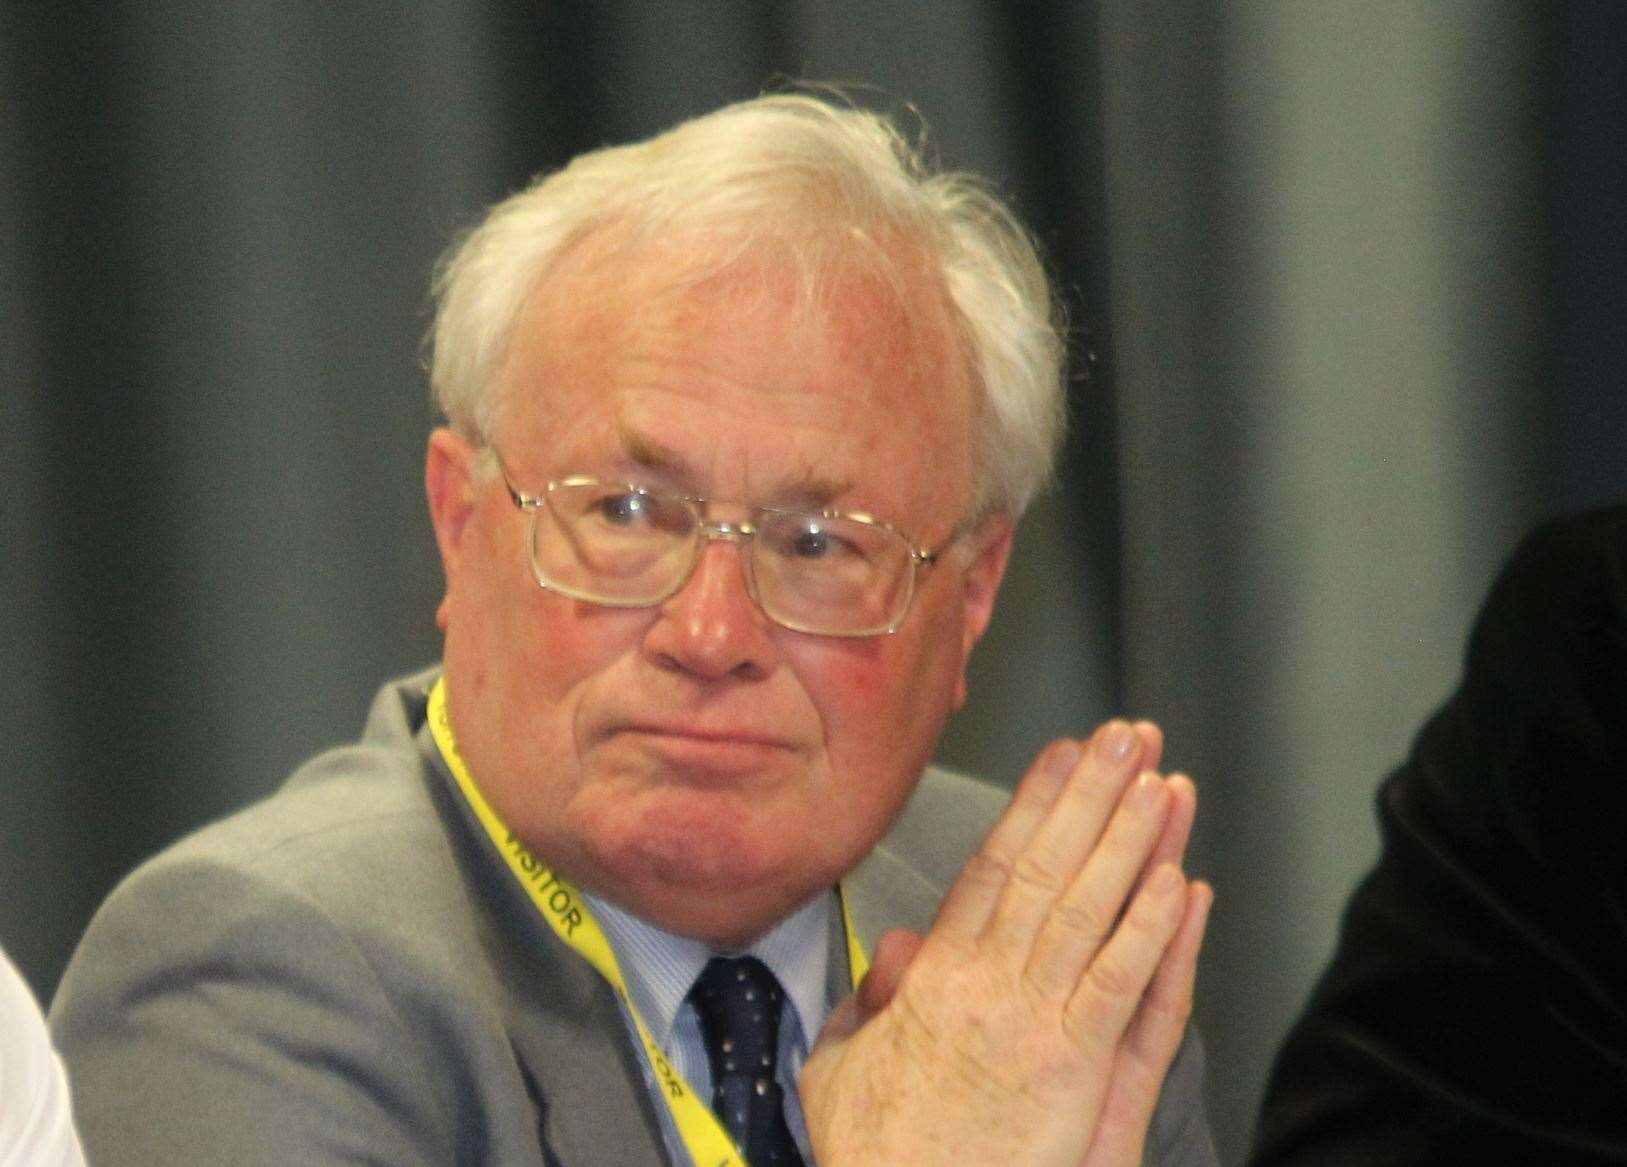 East Malling and Larkfield parish council chairman David Thornewell. Picture: John Westhrop